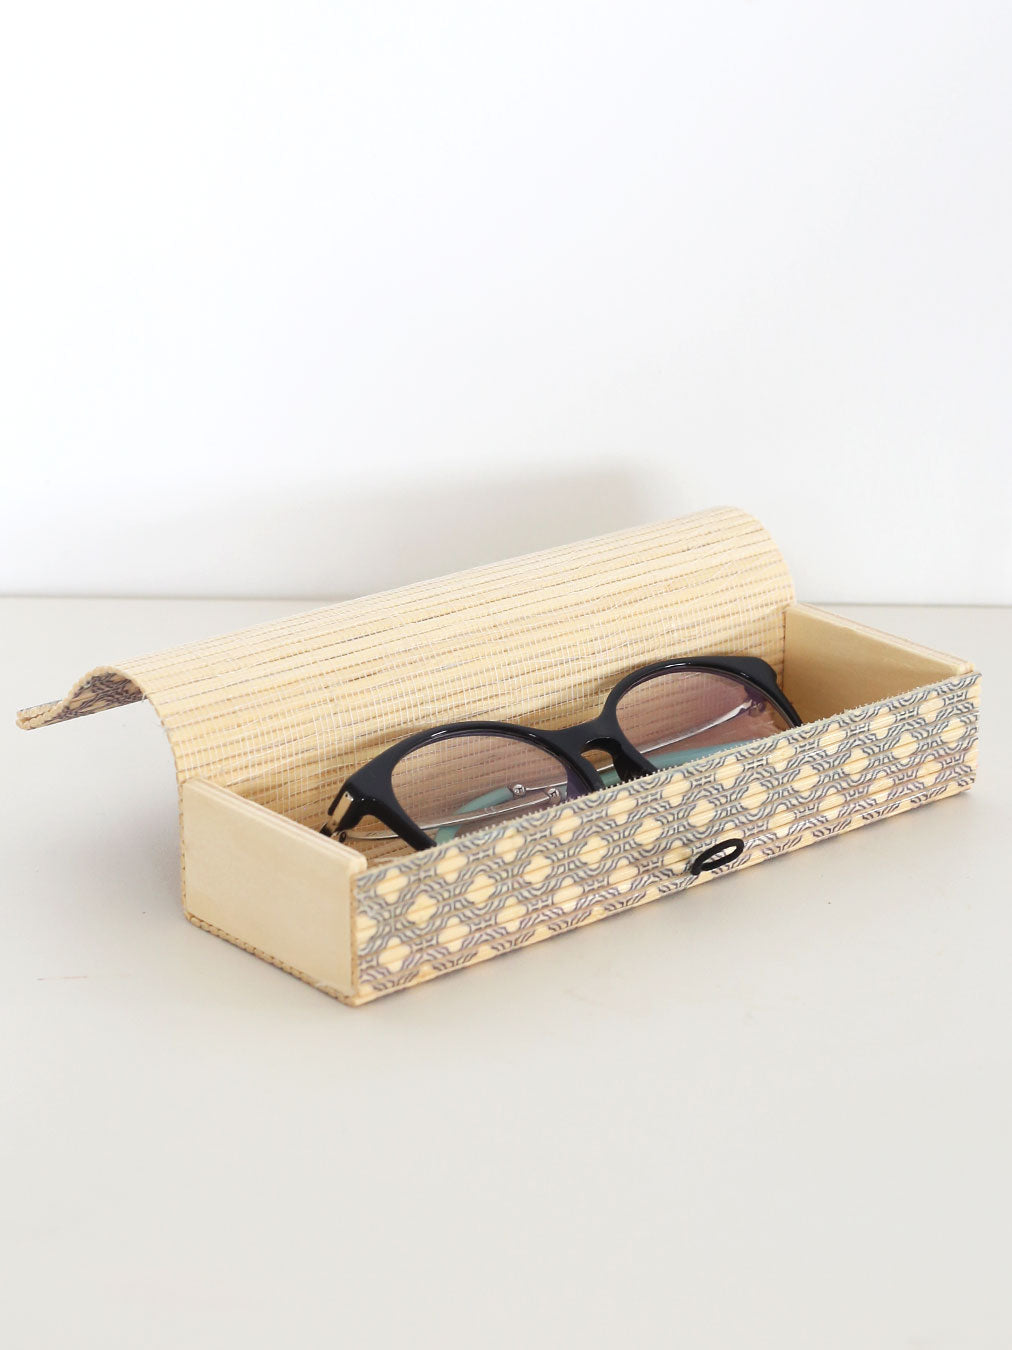 Natural bamboo box for storage and as spectacle case